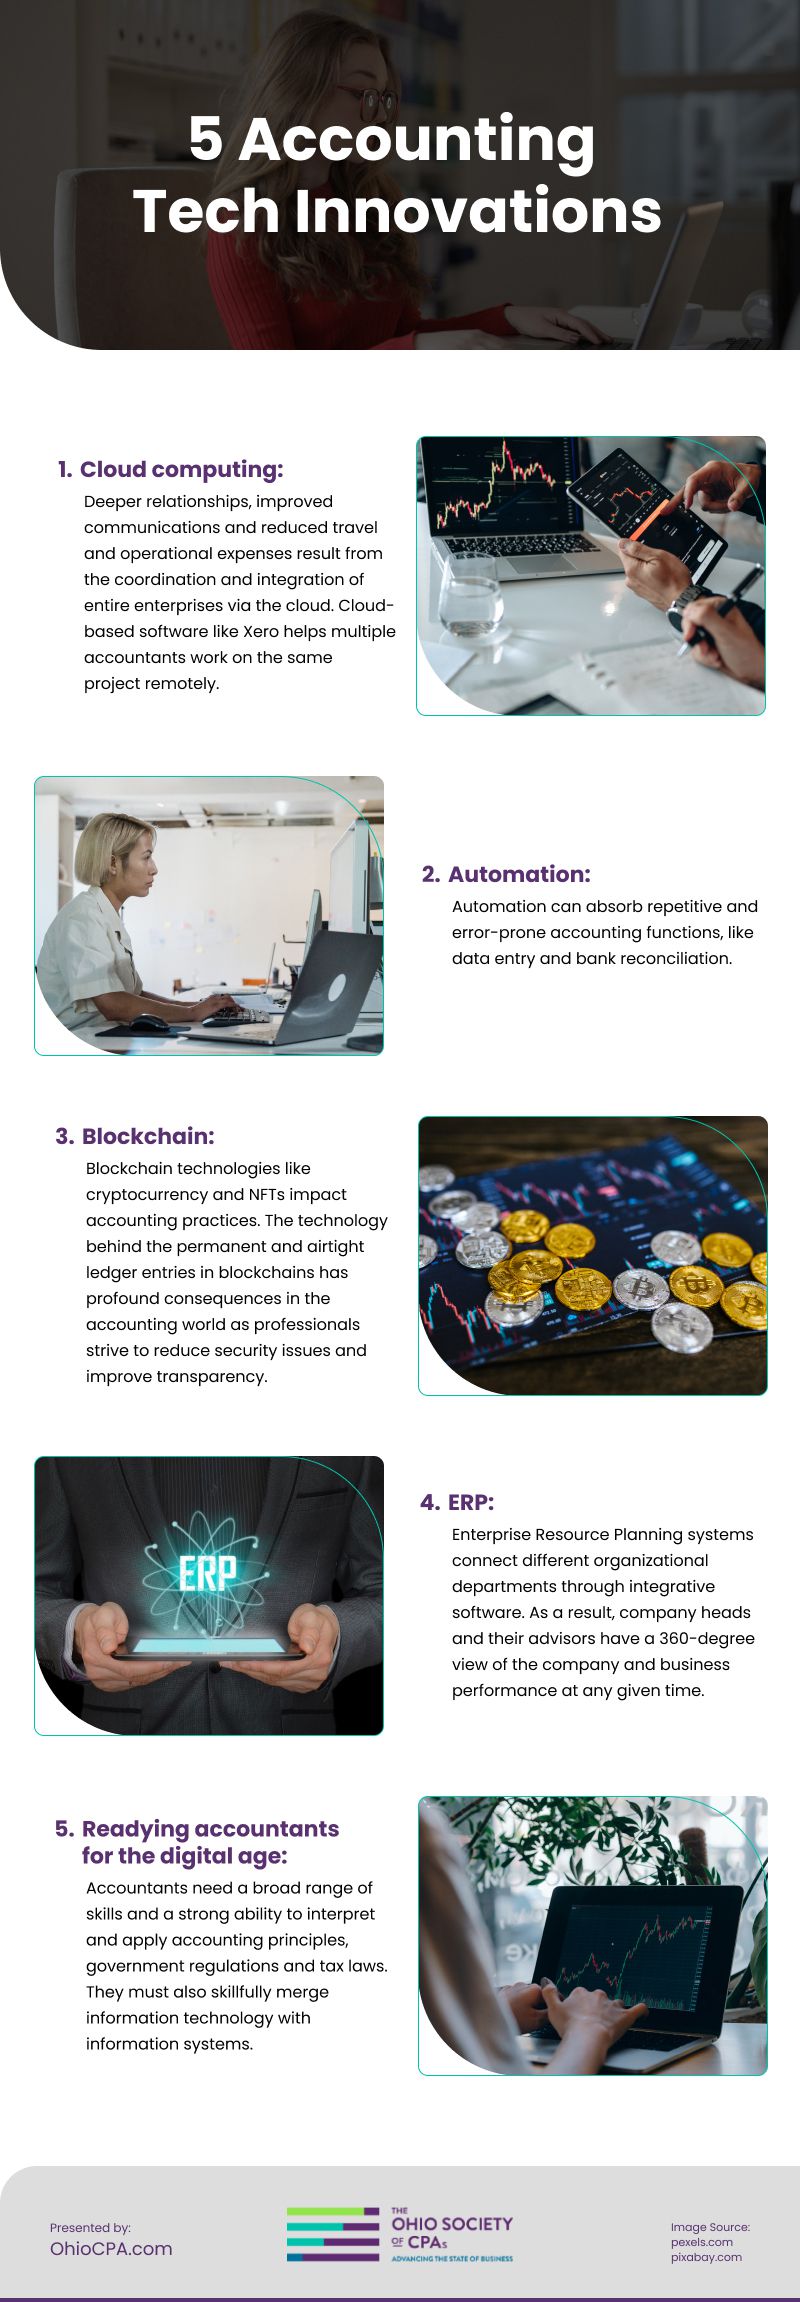 5 Accounting Tech Innovations Infographic